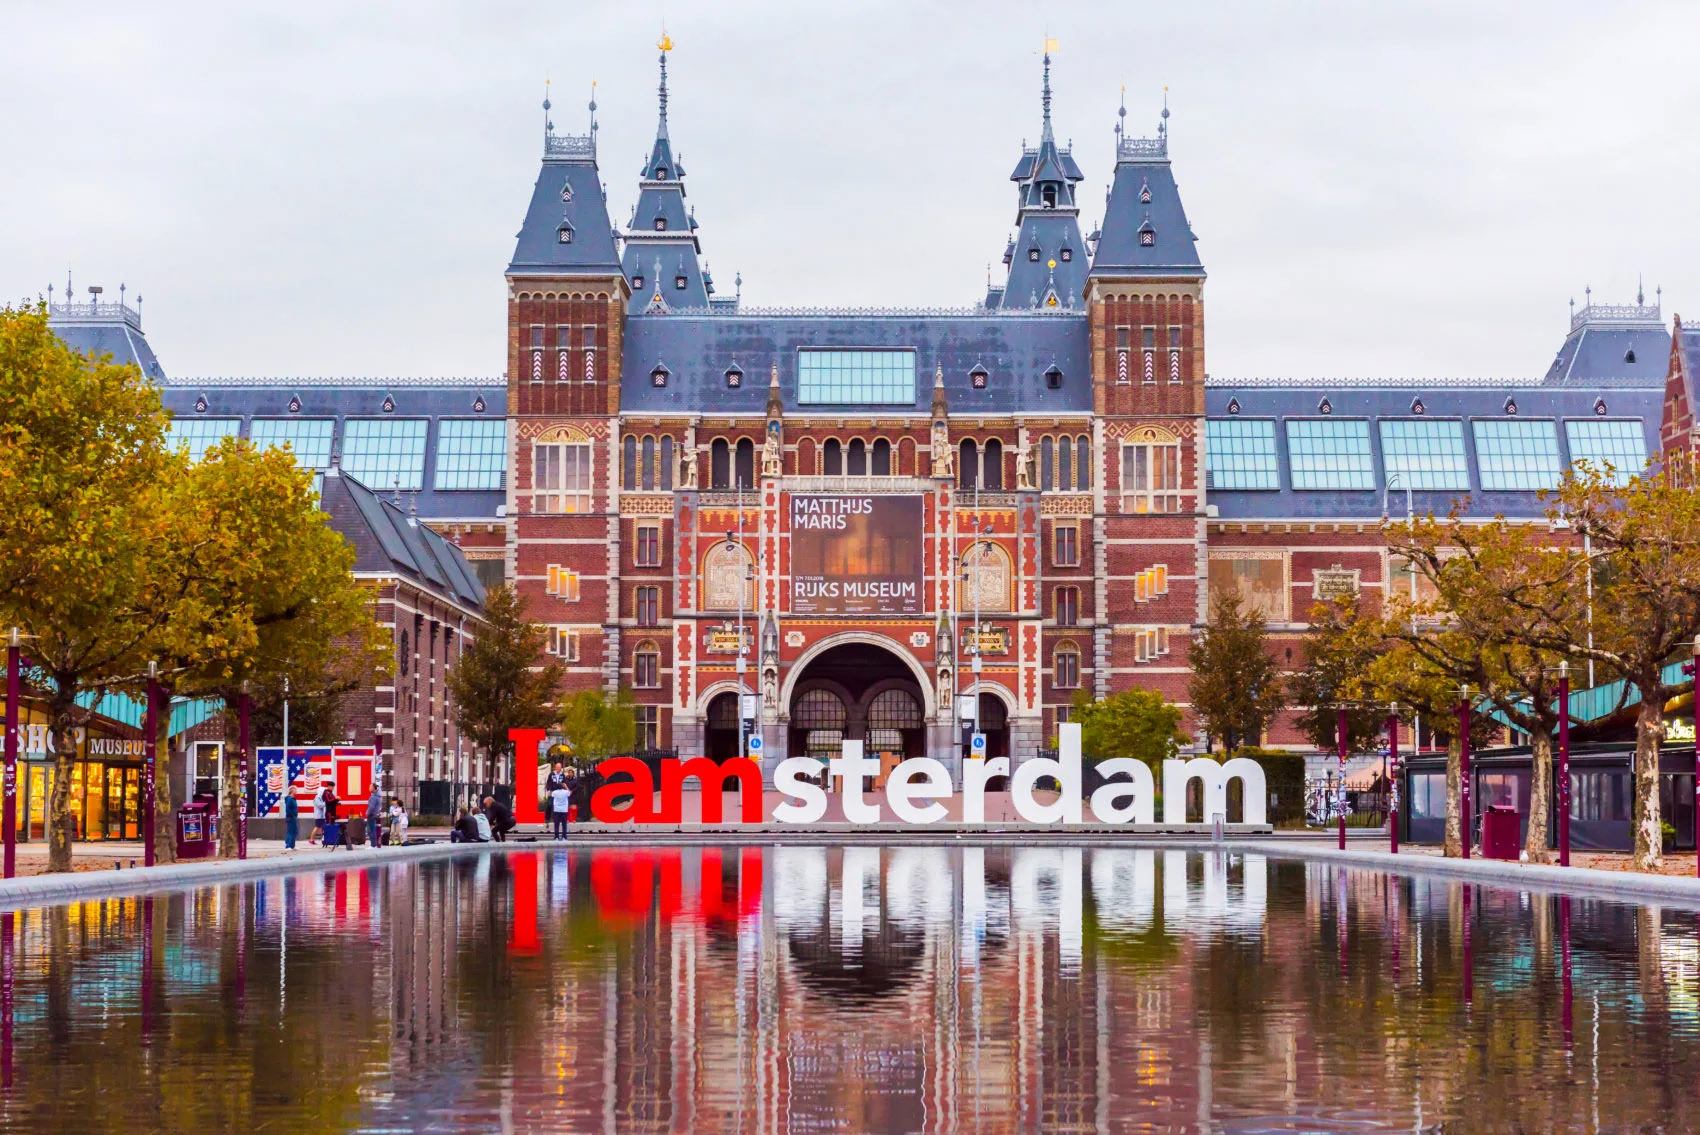 IT Staffing Companies in Amsterdam